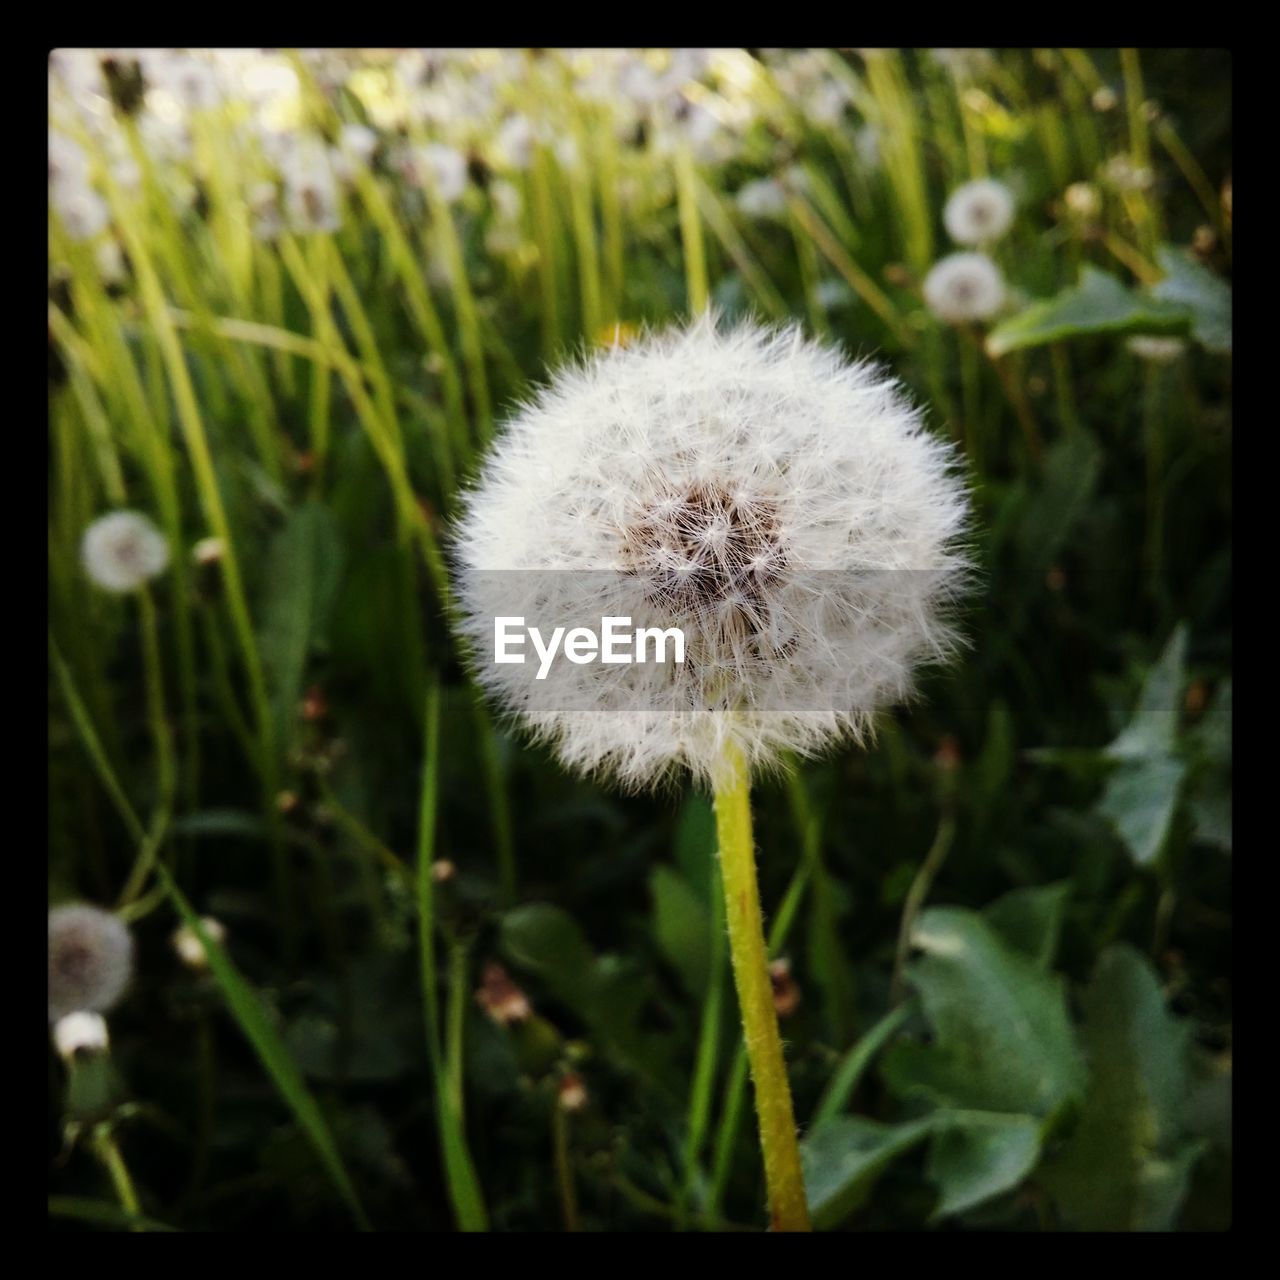 CLOSE-UP OF DANDELION GROWING OUTDOORS